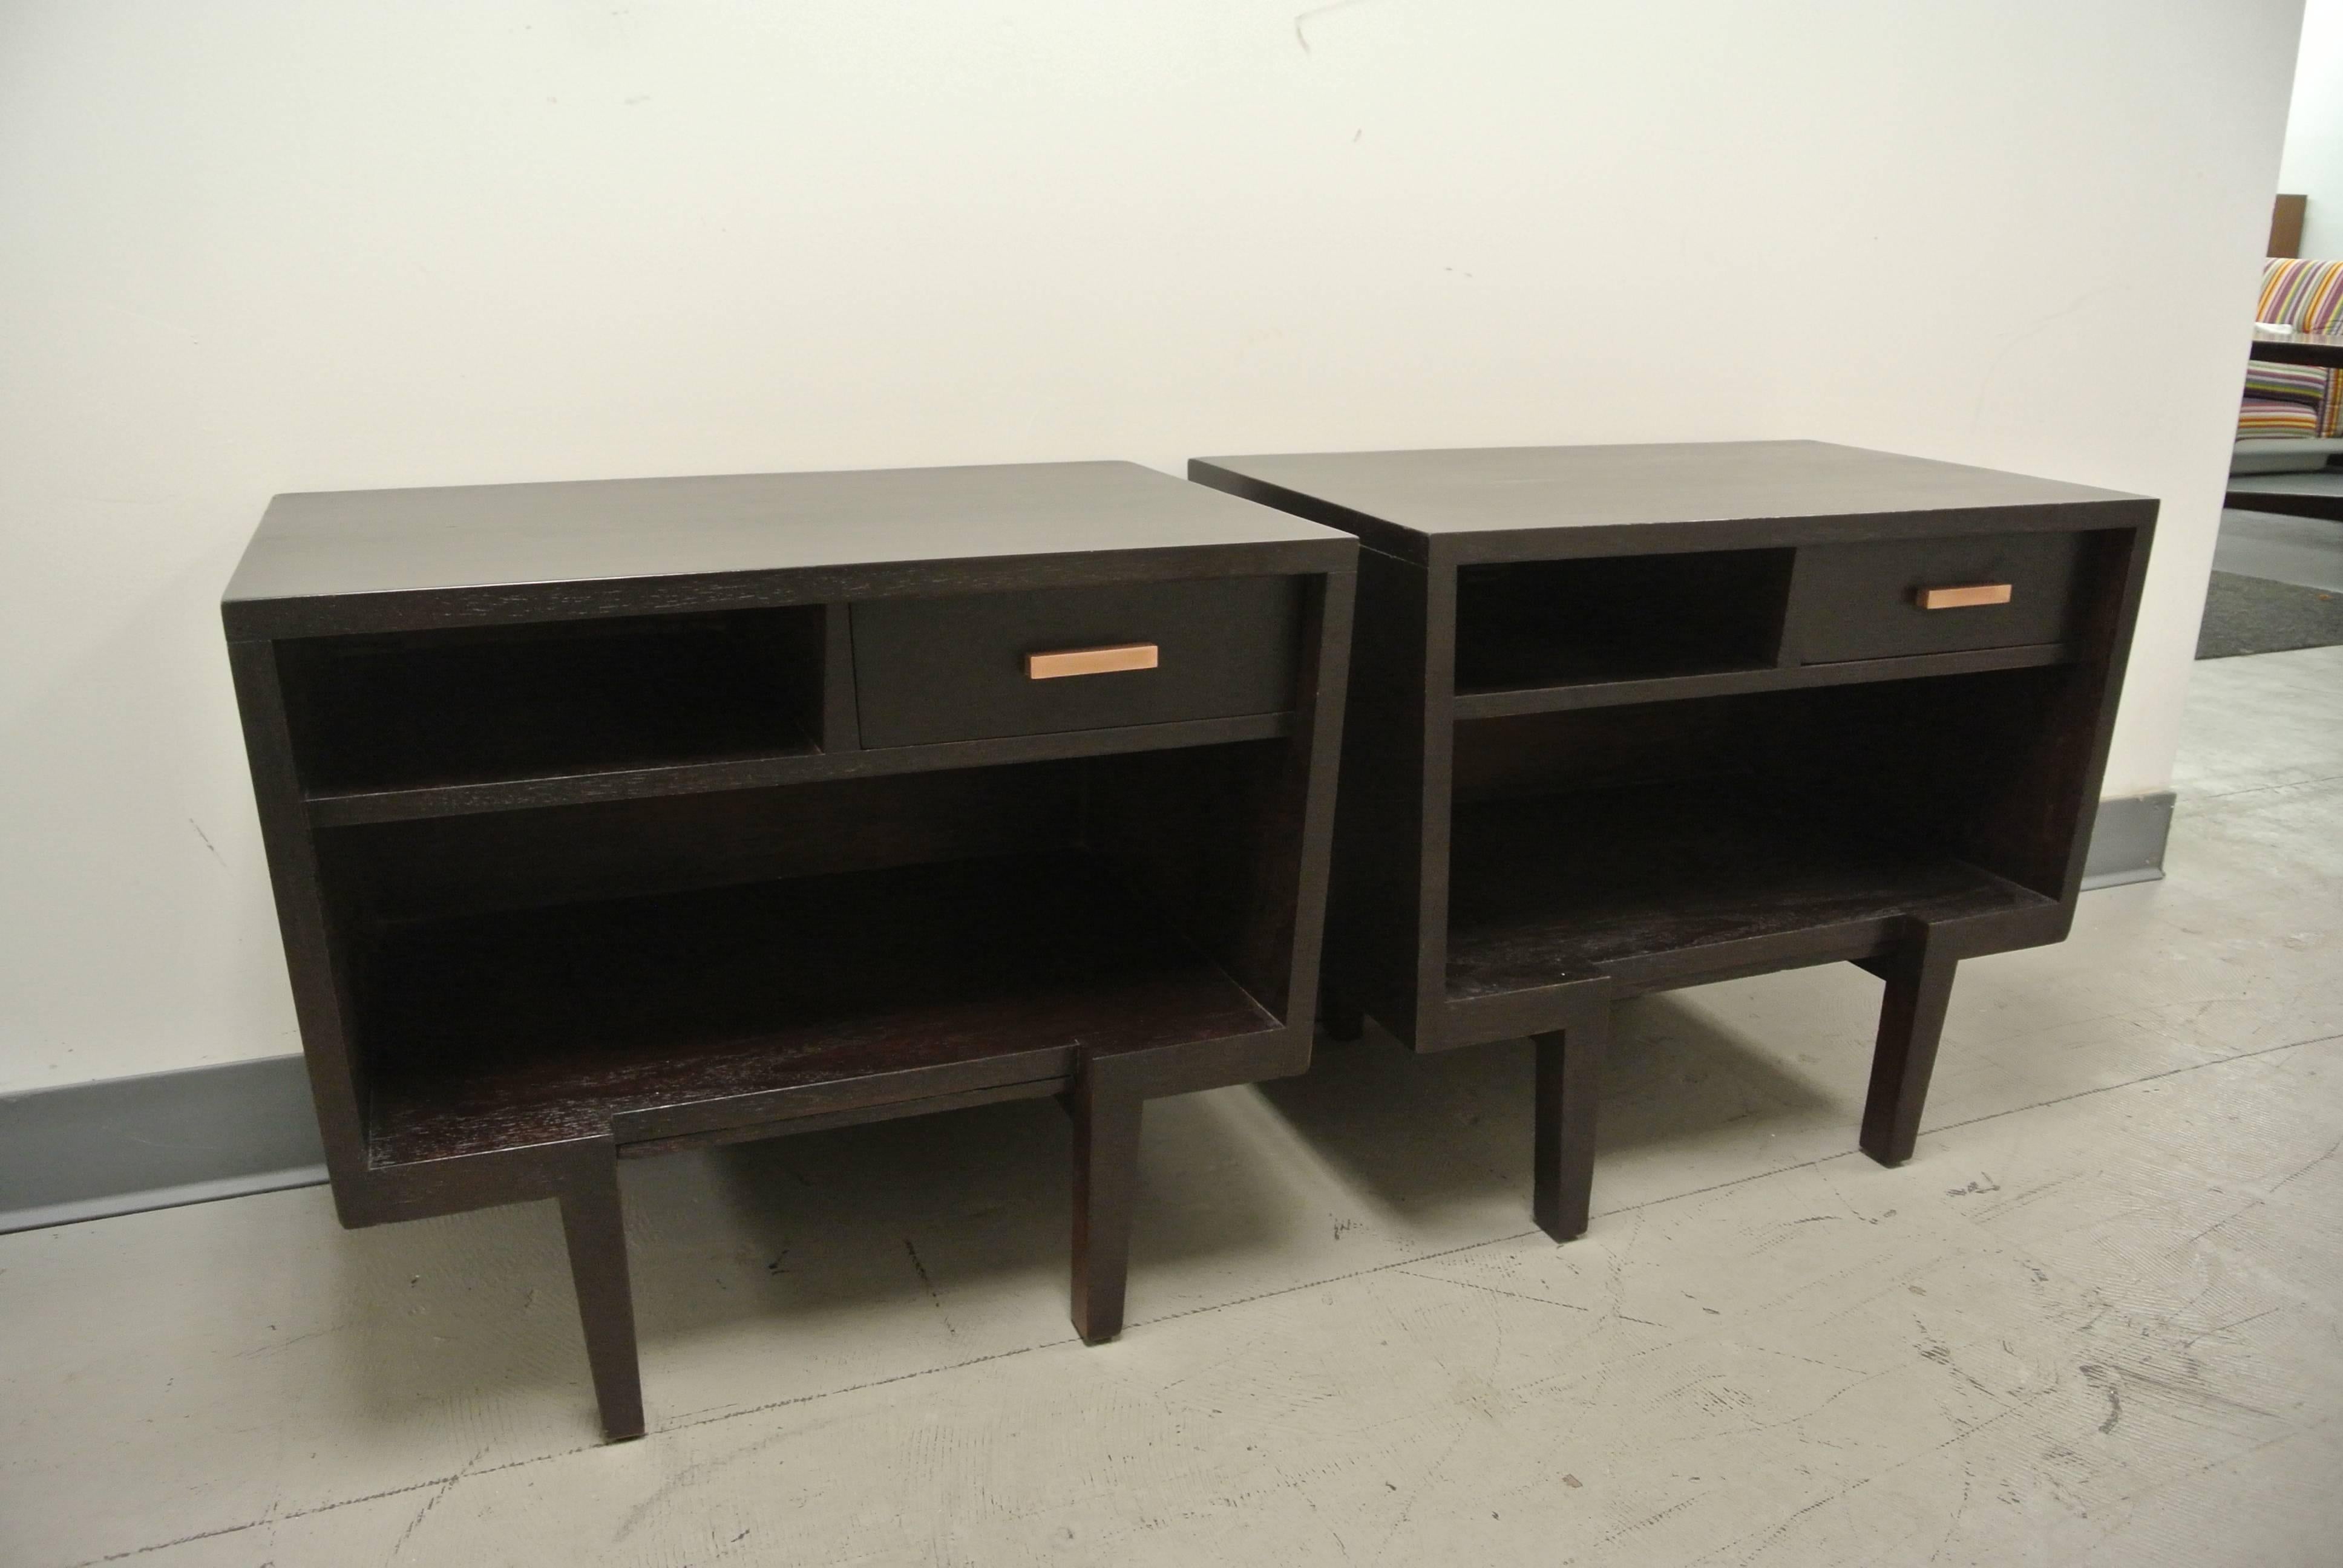 Pair of Nightstands by Grosfeld House. Each has two compartments along with a singular drawer w. copper pull and pull out lower tray